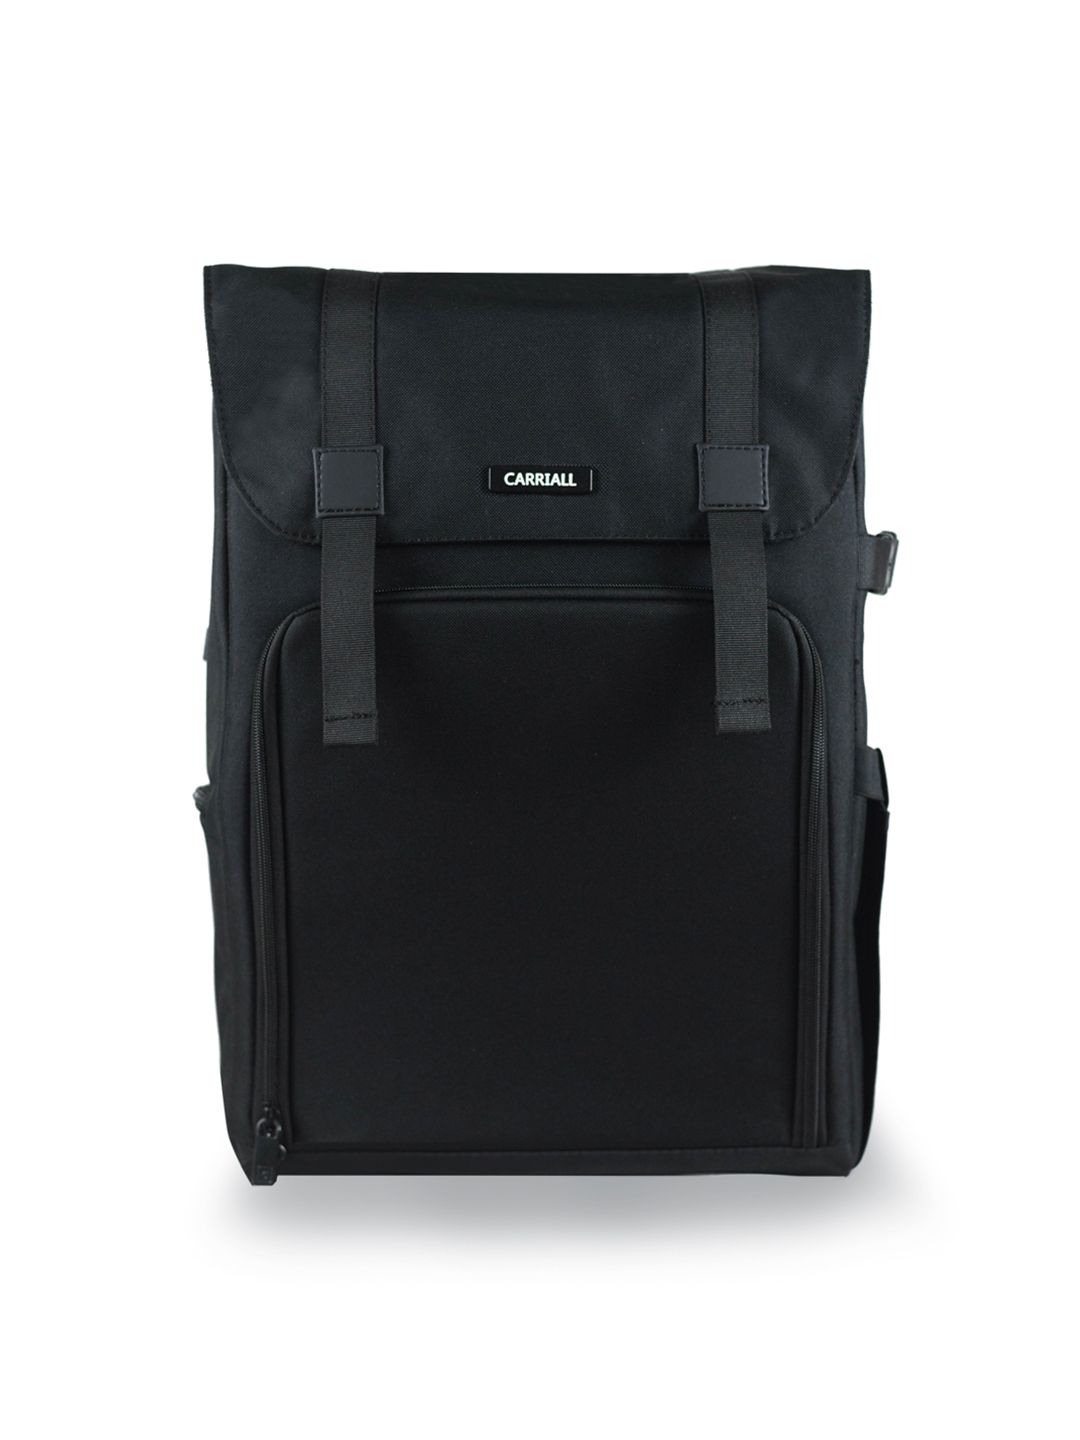 CARRIALL Unisex Black Backpack Price in India